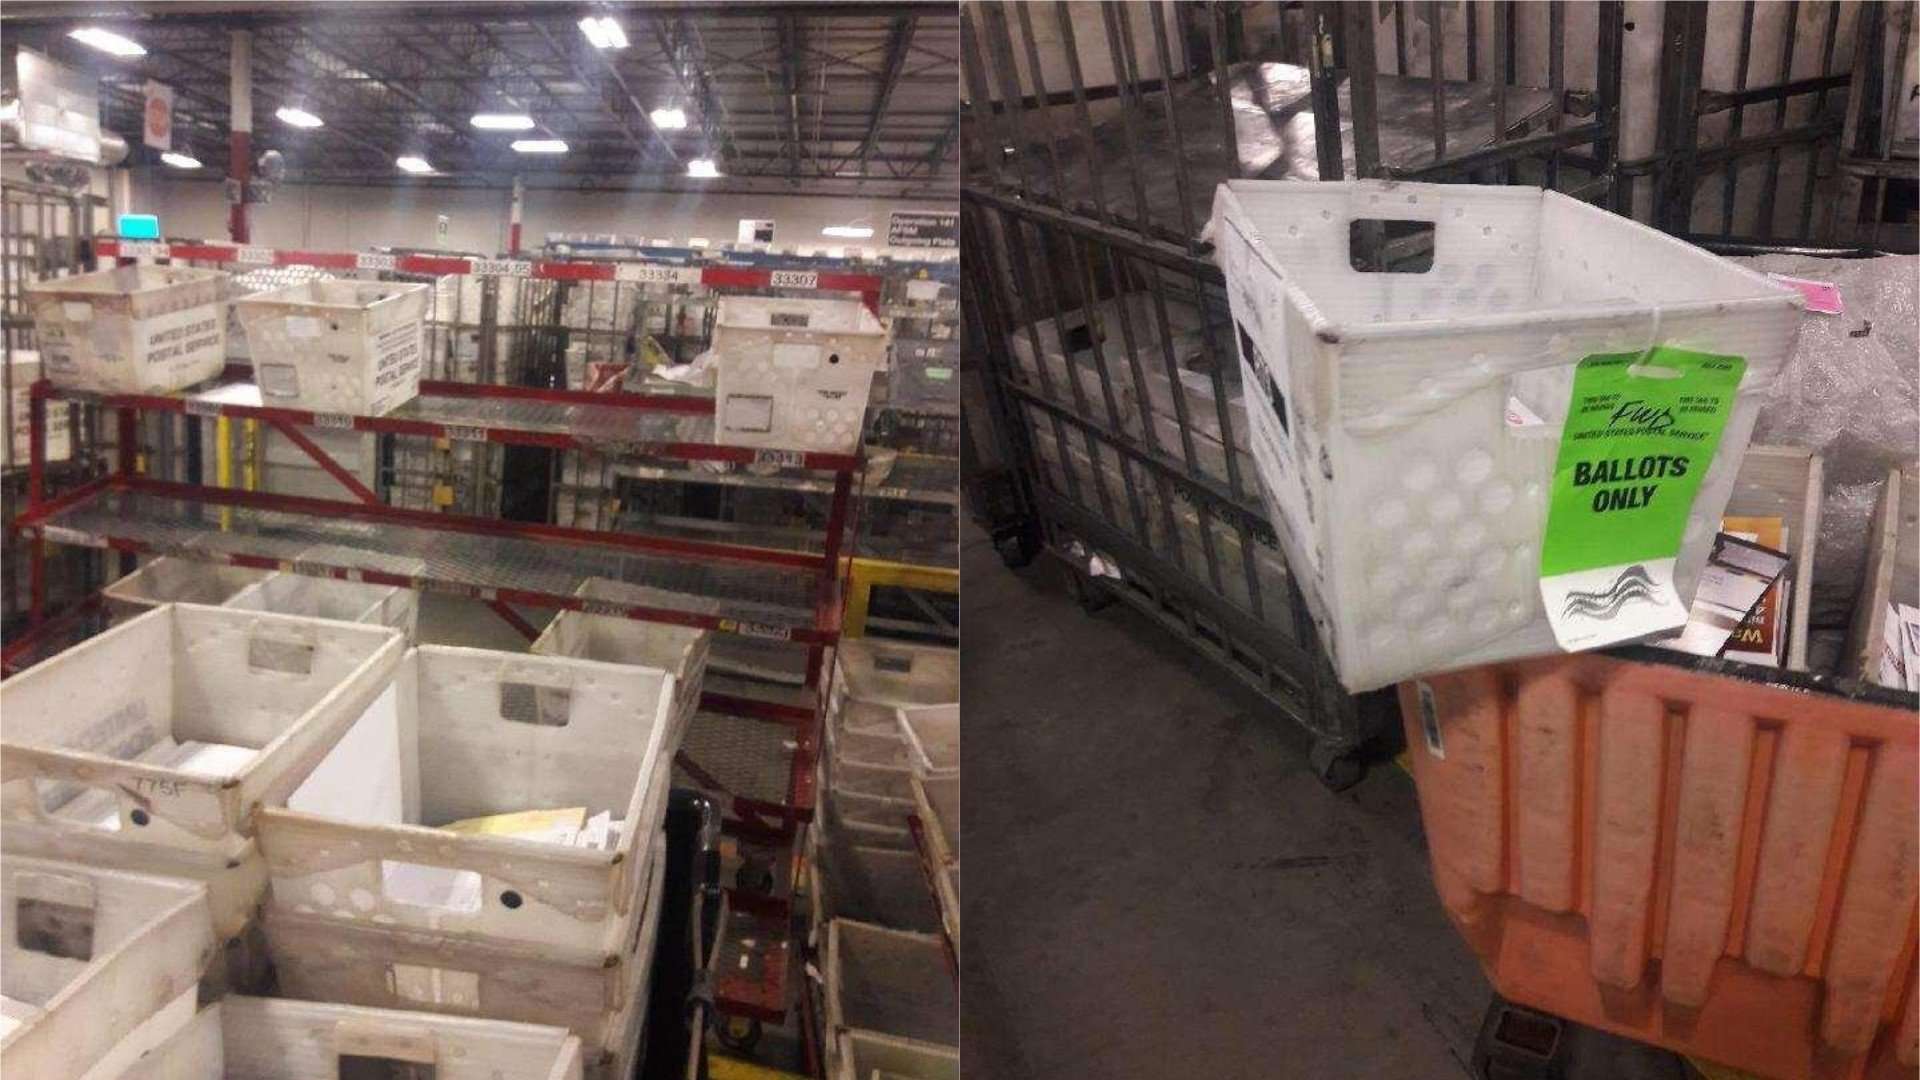 image for Photos Show Scores of Uncounted Ballots in Opa-locka Mail Center